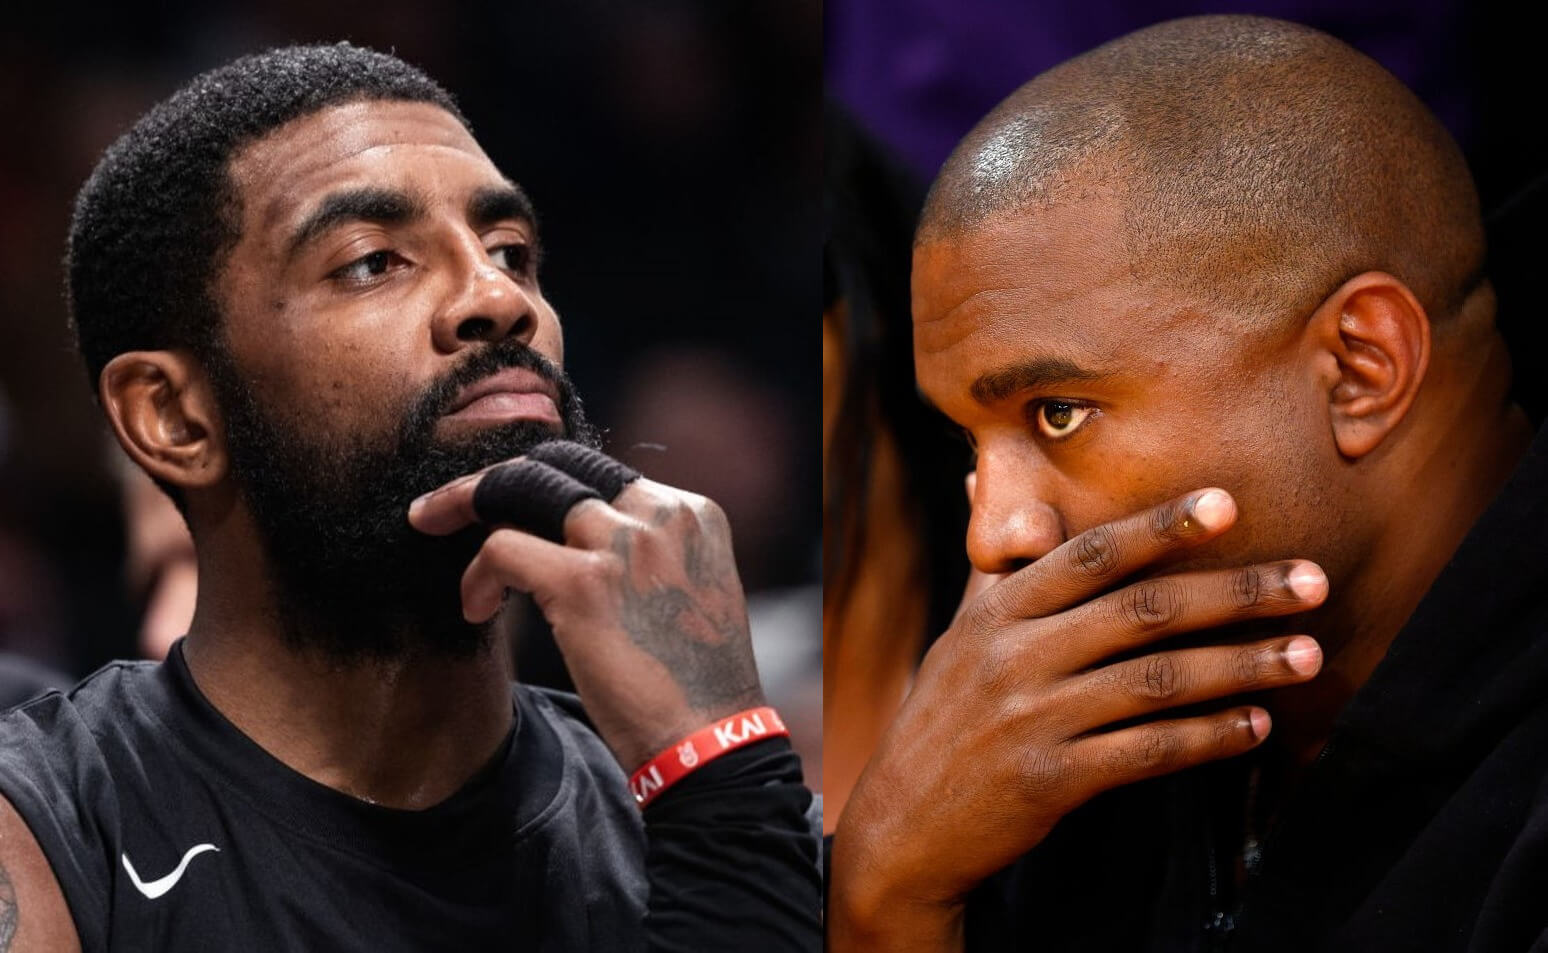 Left: Kyrie Irving looks on from the bench during a game against the Indiana Pacers at the Barclays Center in Brooklyn, Oct. 31, 2022, and Kanye West, now known as Ye, attends a game in March 2022 between the Washington Wizards and home team Los Angeles Lakers. 